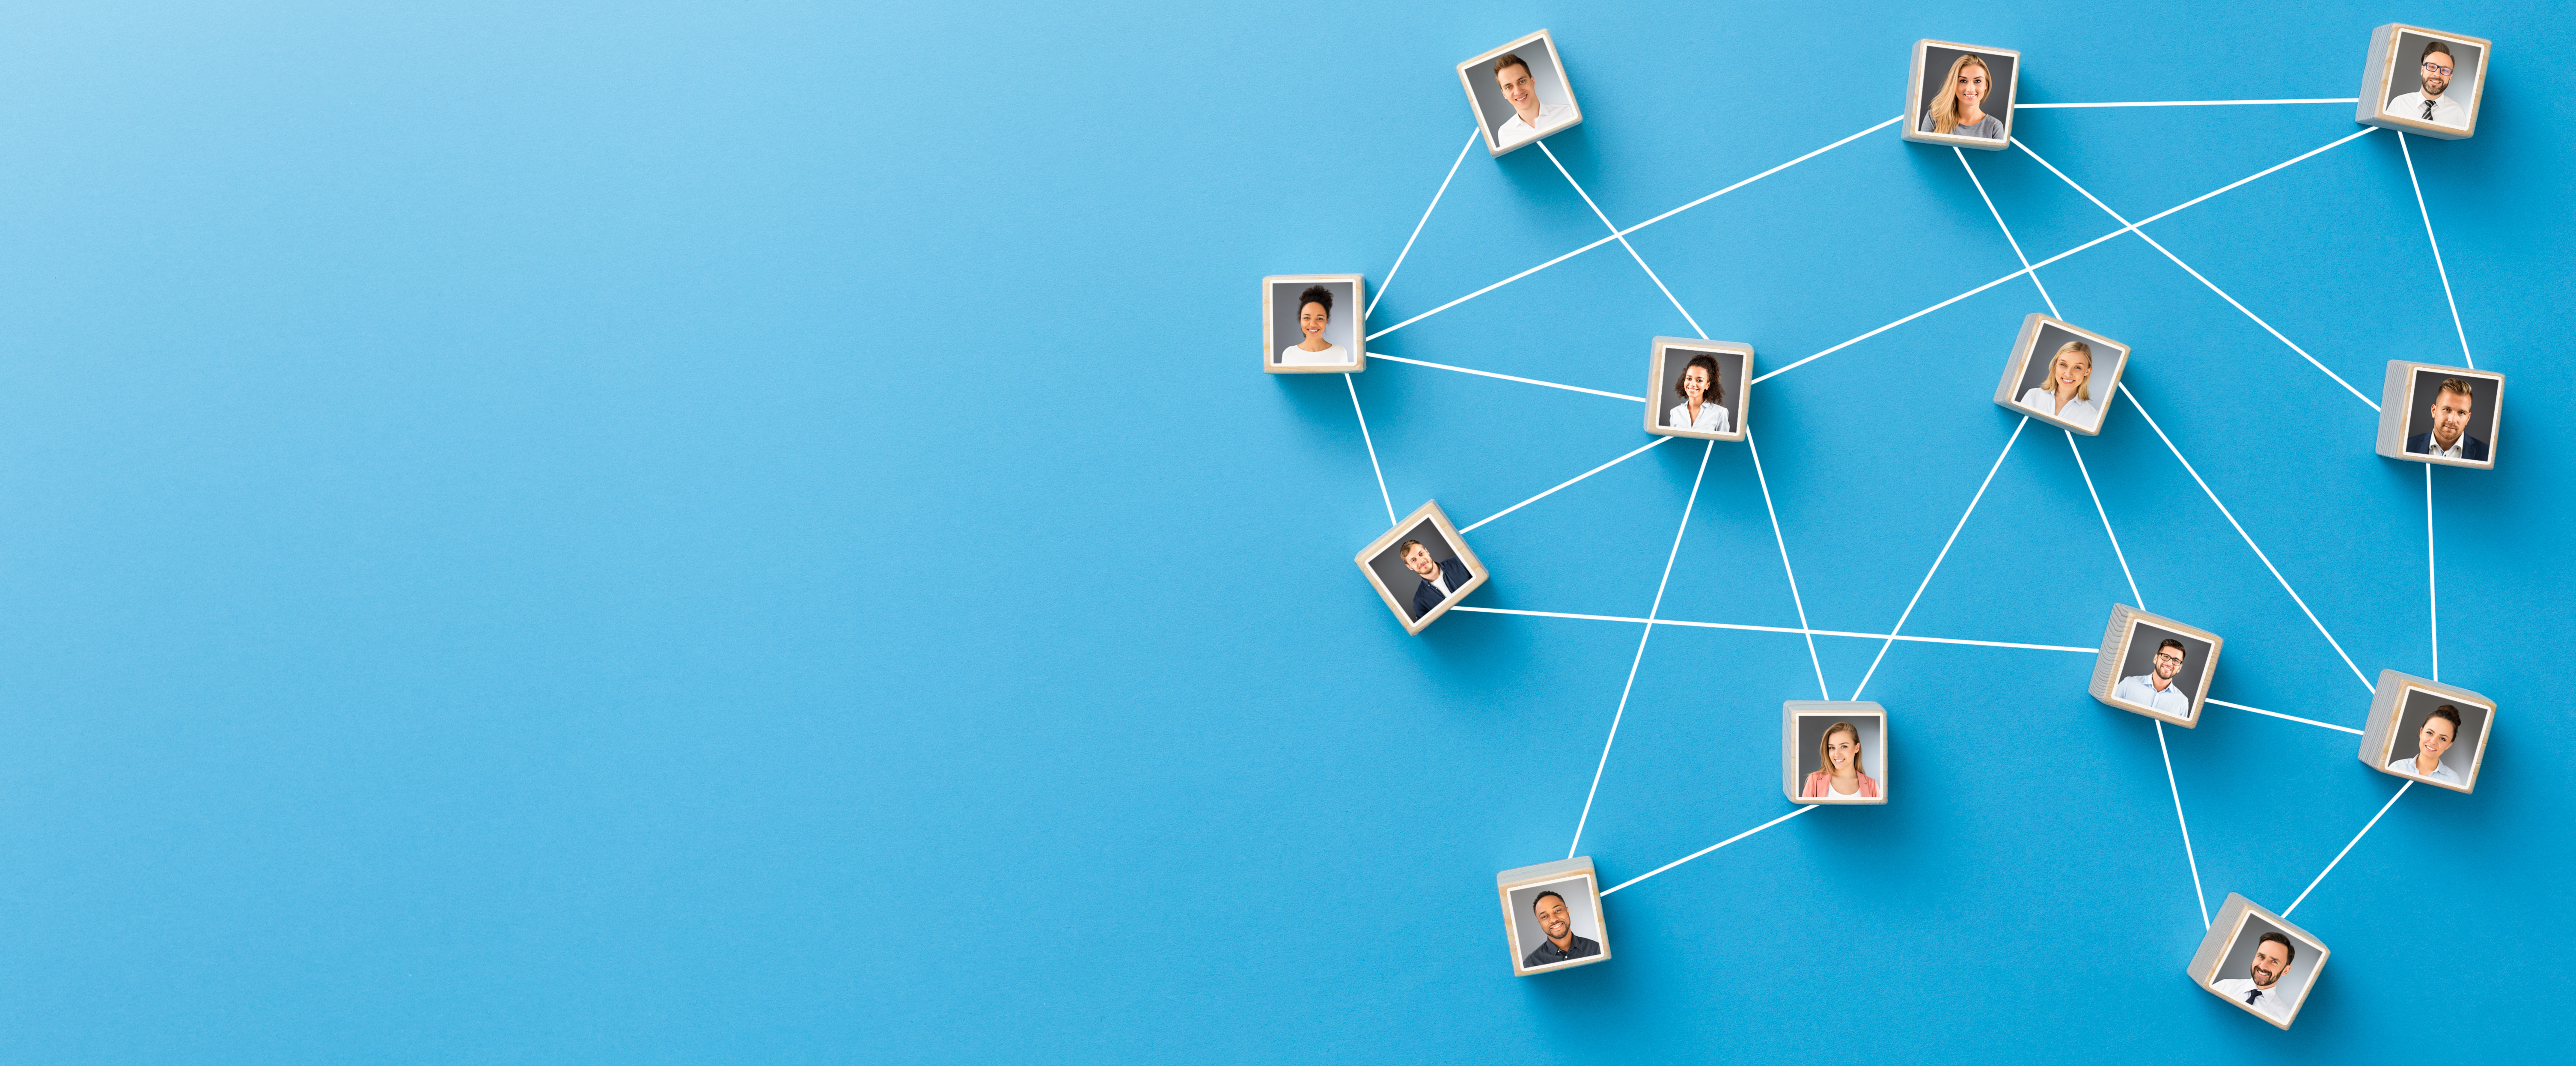 portrait image blocks linked with white lines on blue background networking concept